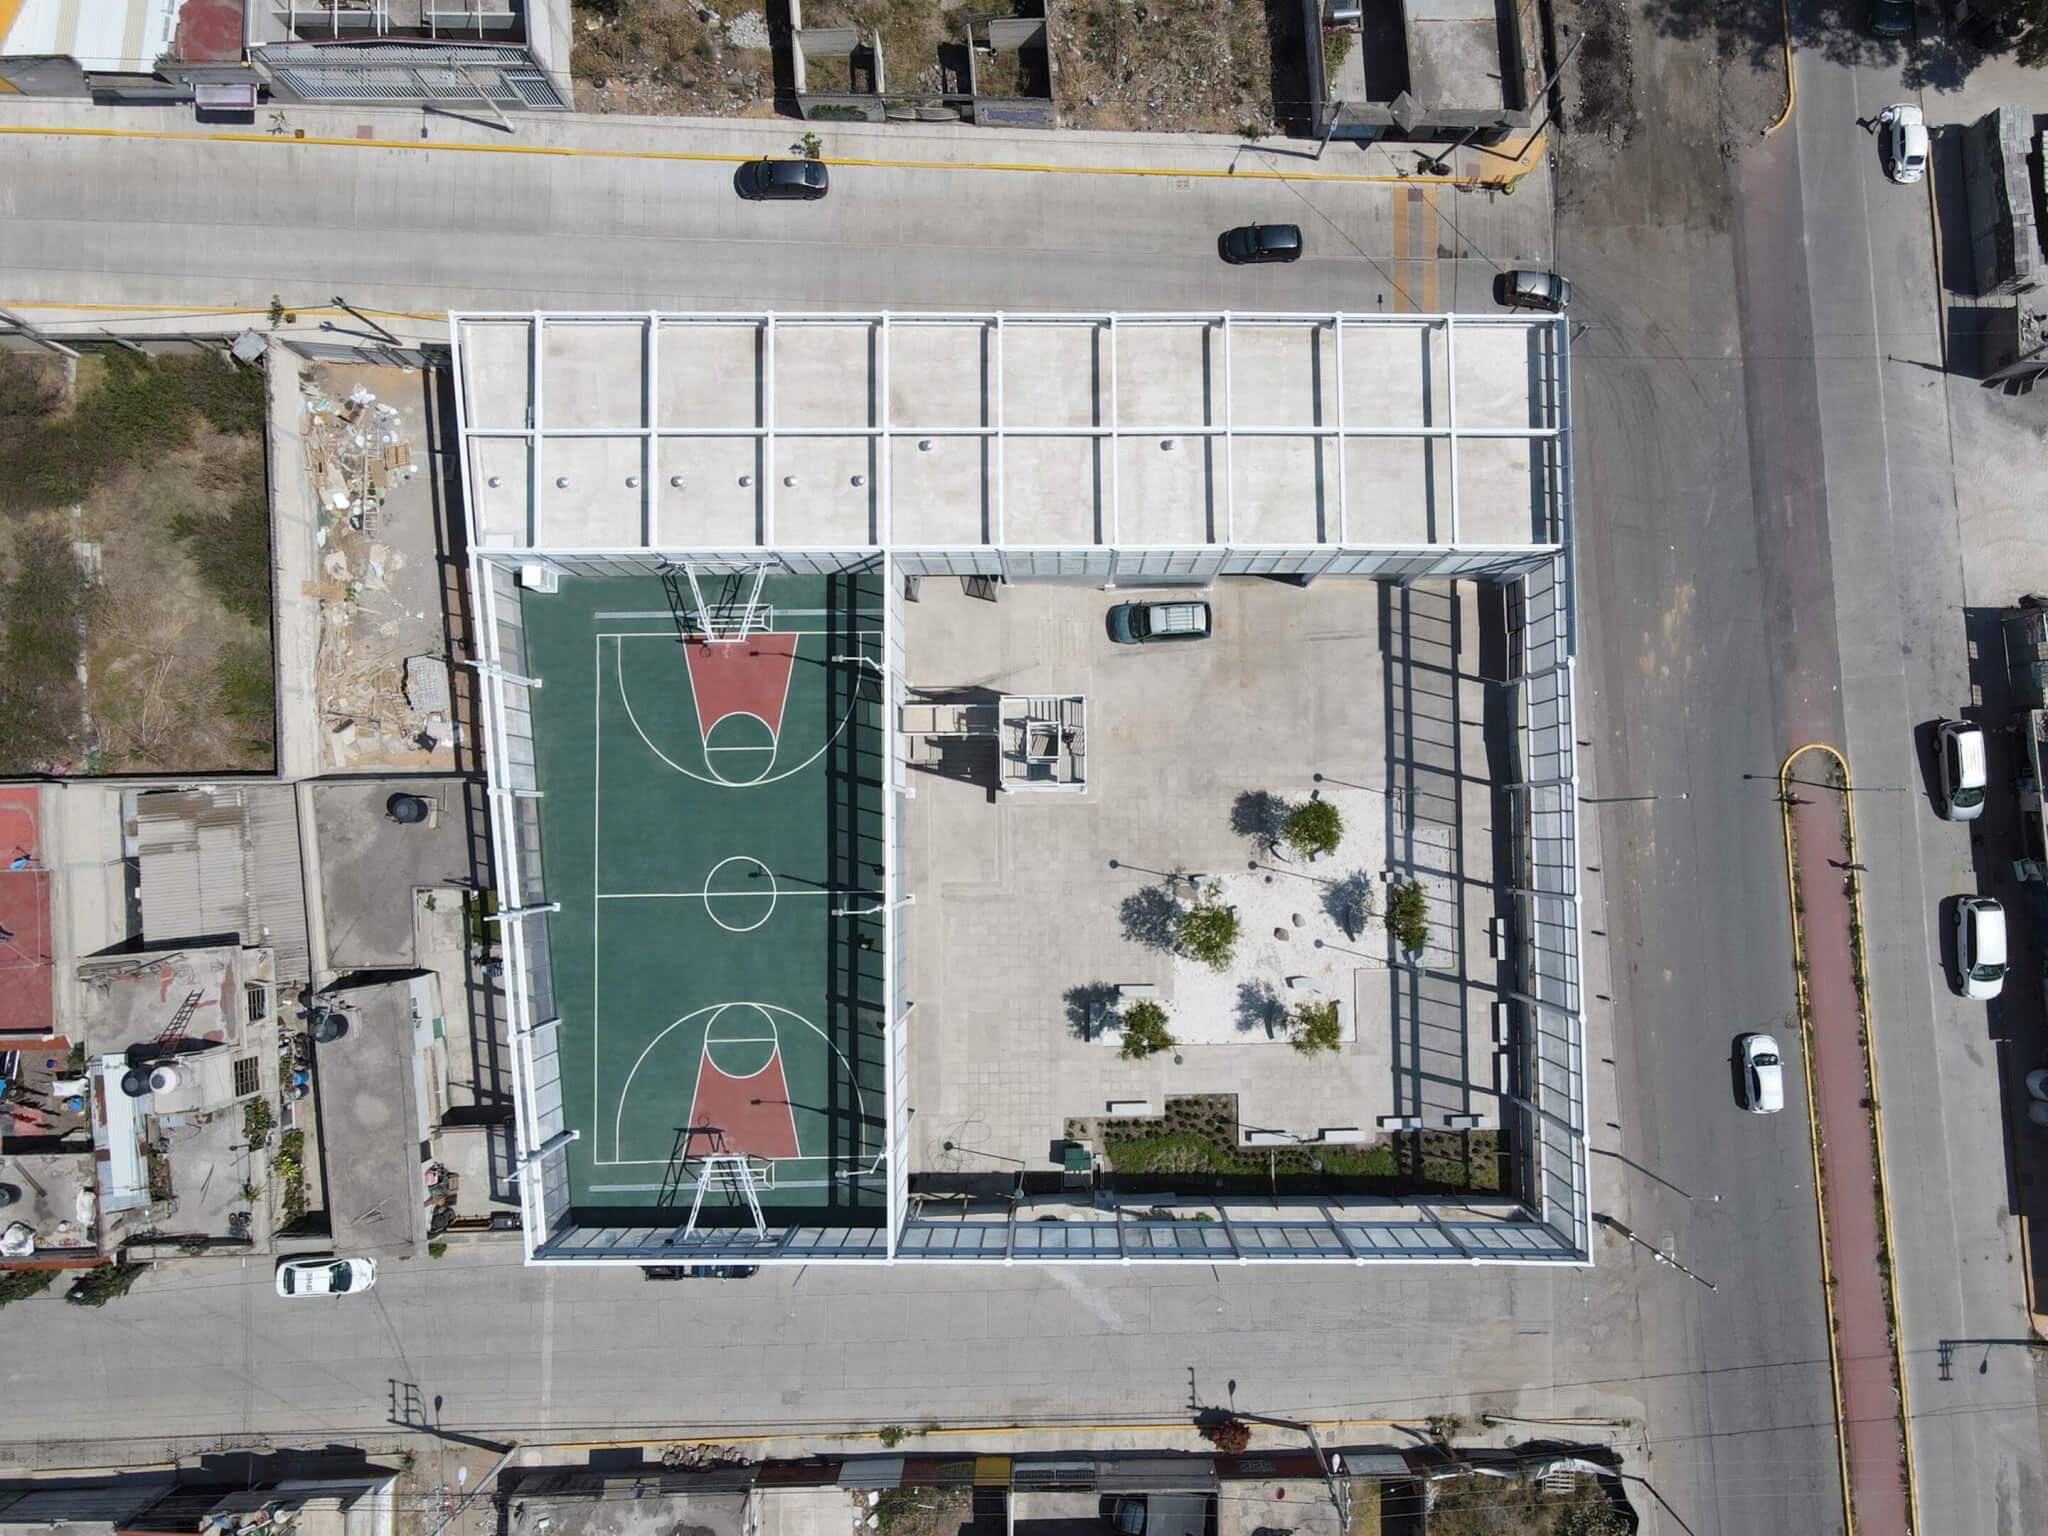 Bird's eye view of fire station, featuring a basketball court and a recreational area inside the building/